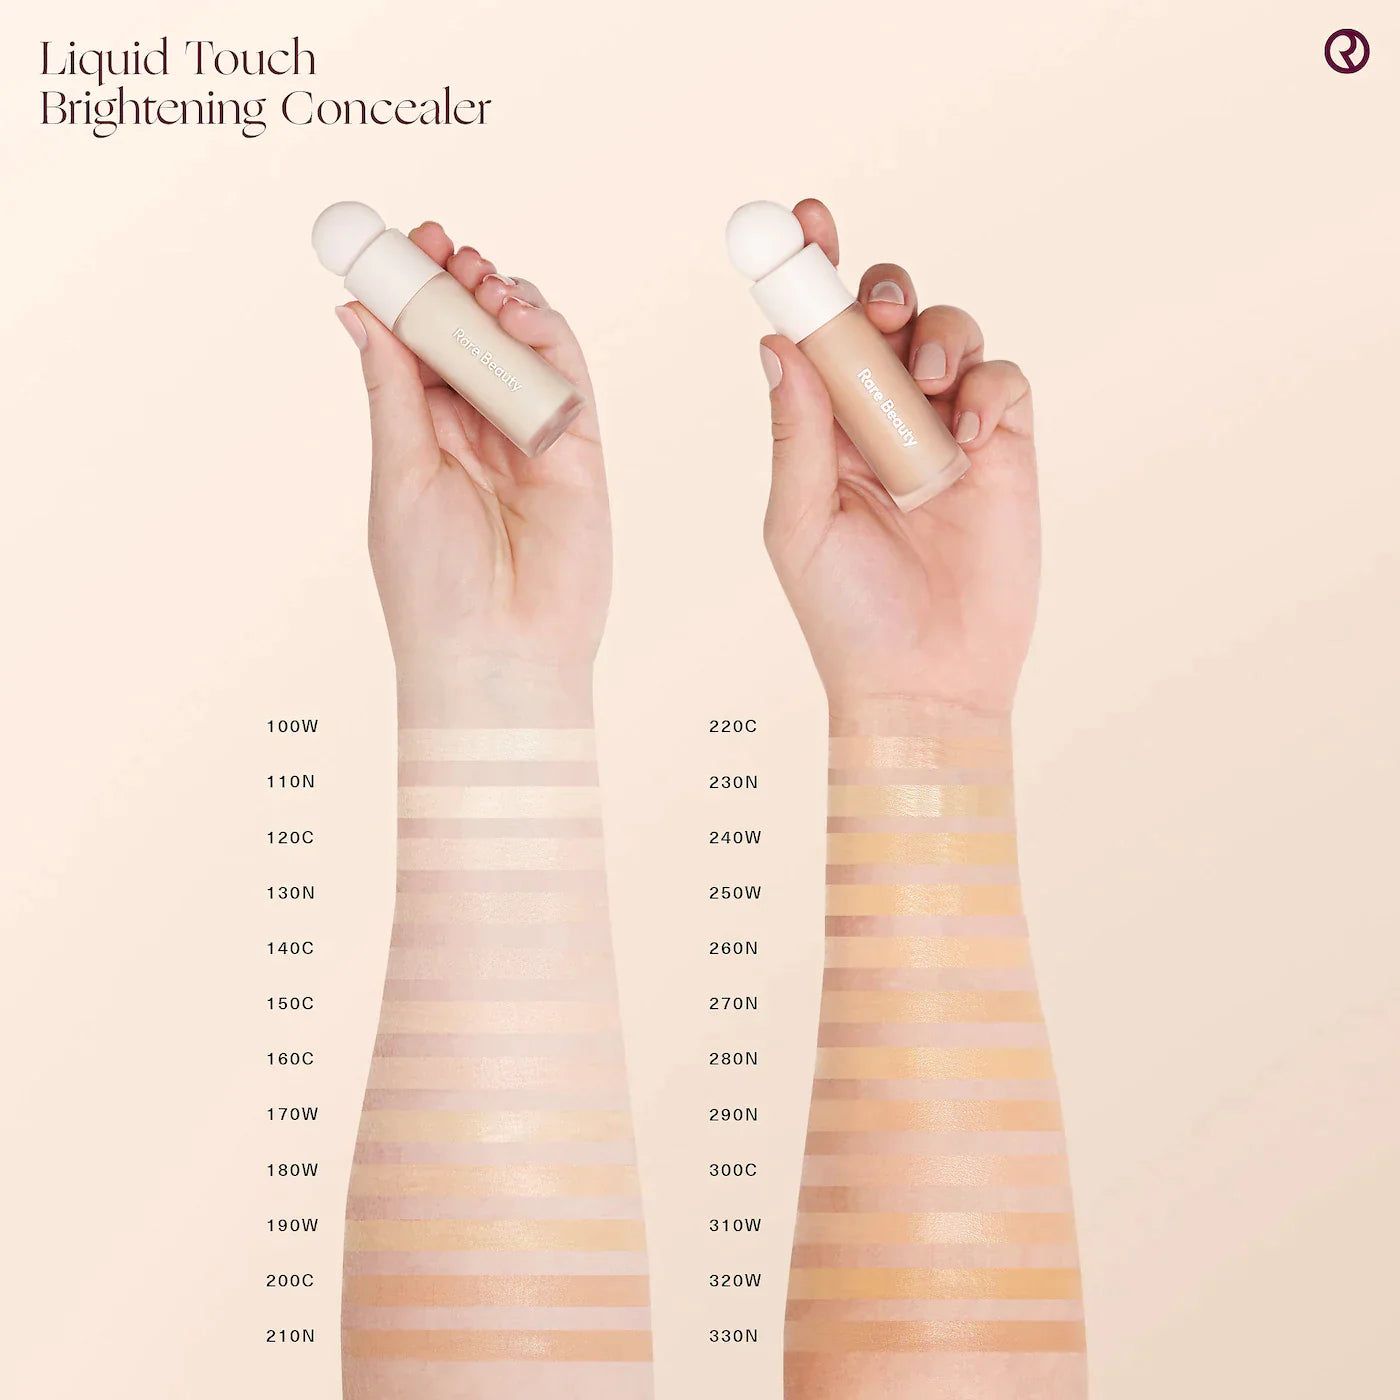 Rare Beauty Liquid Touch Brightening Concealer | 130N